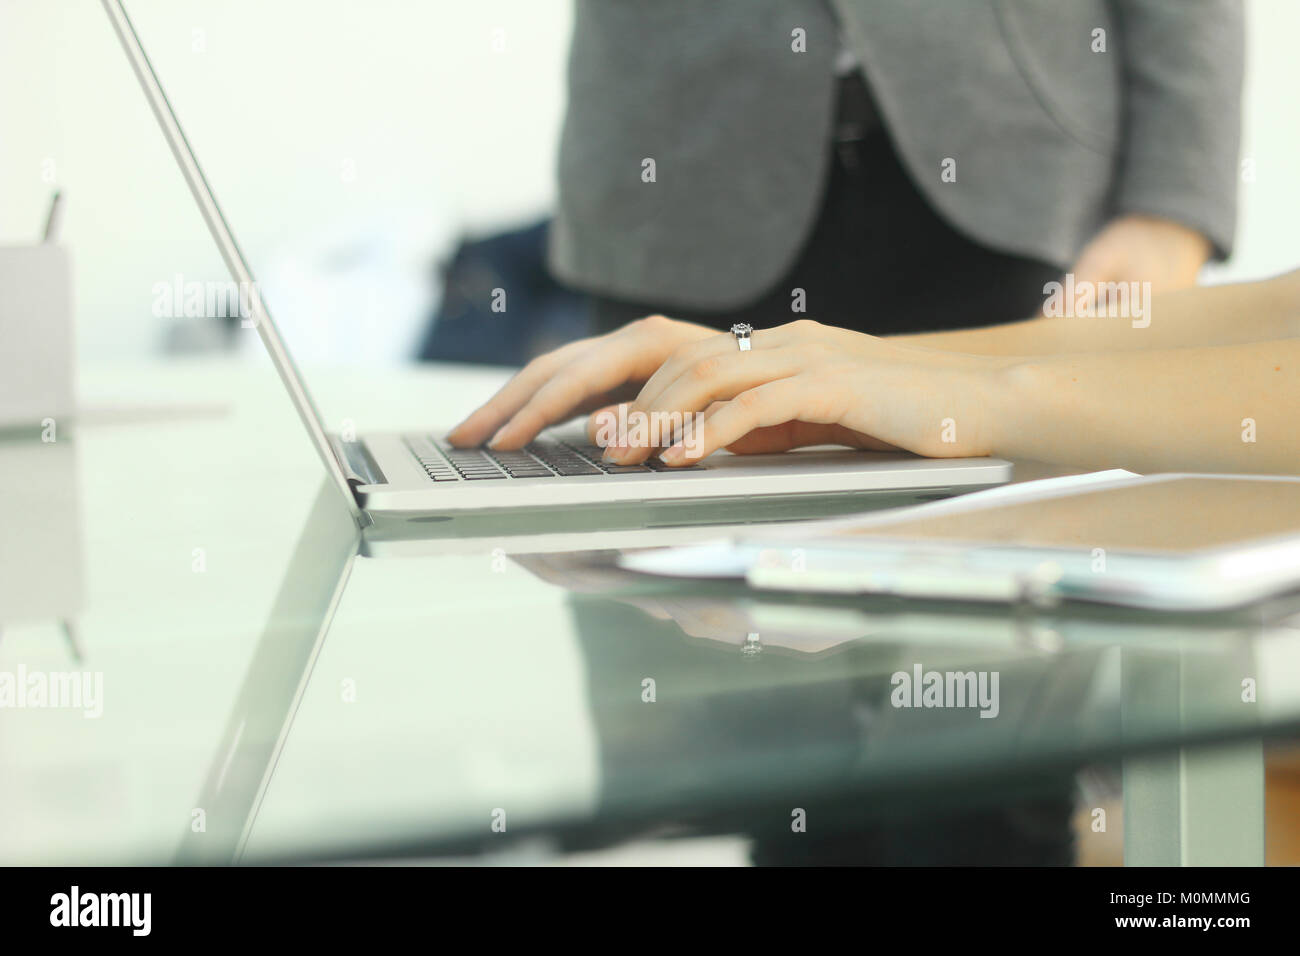 Business woman hands using laptop Stock Photo - Alamy